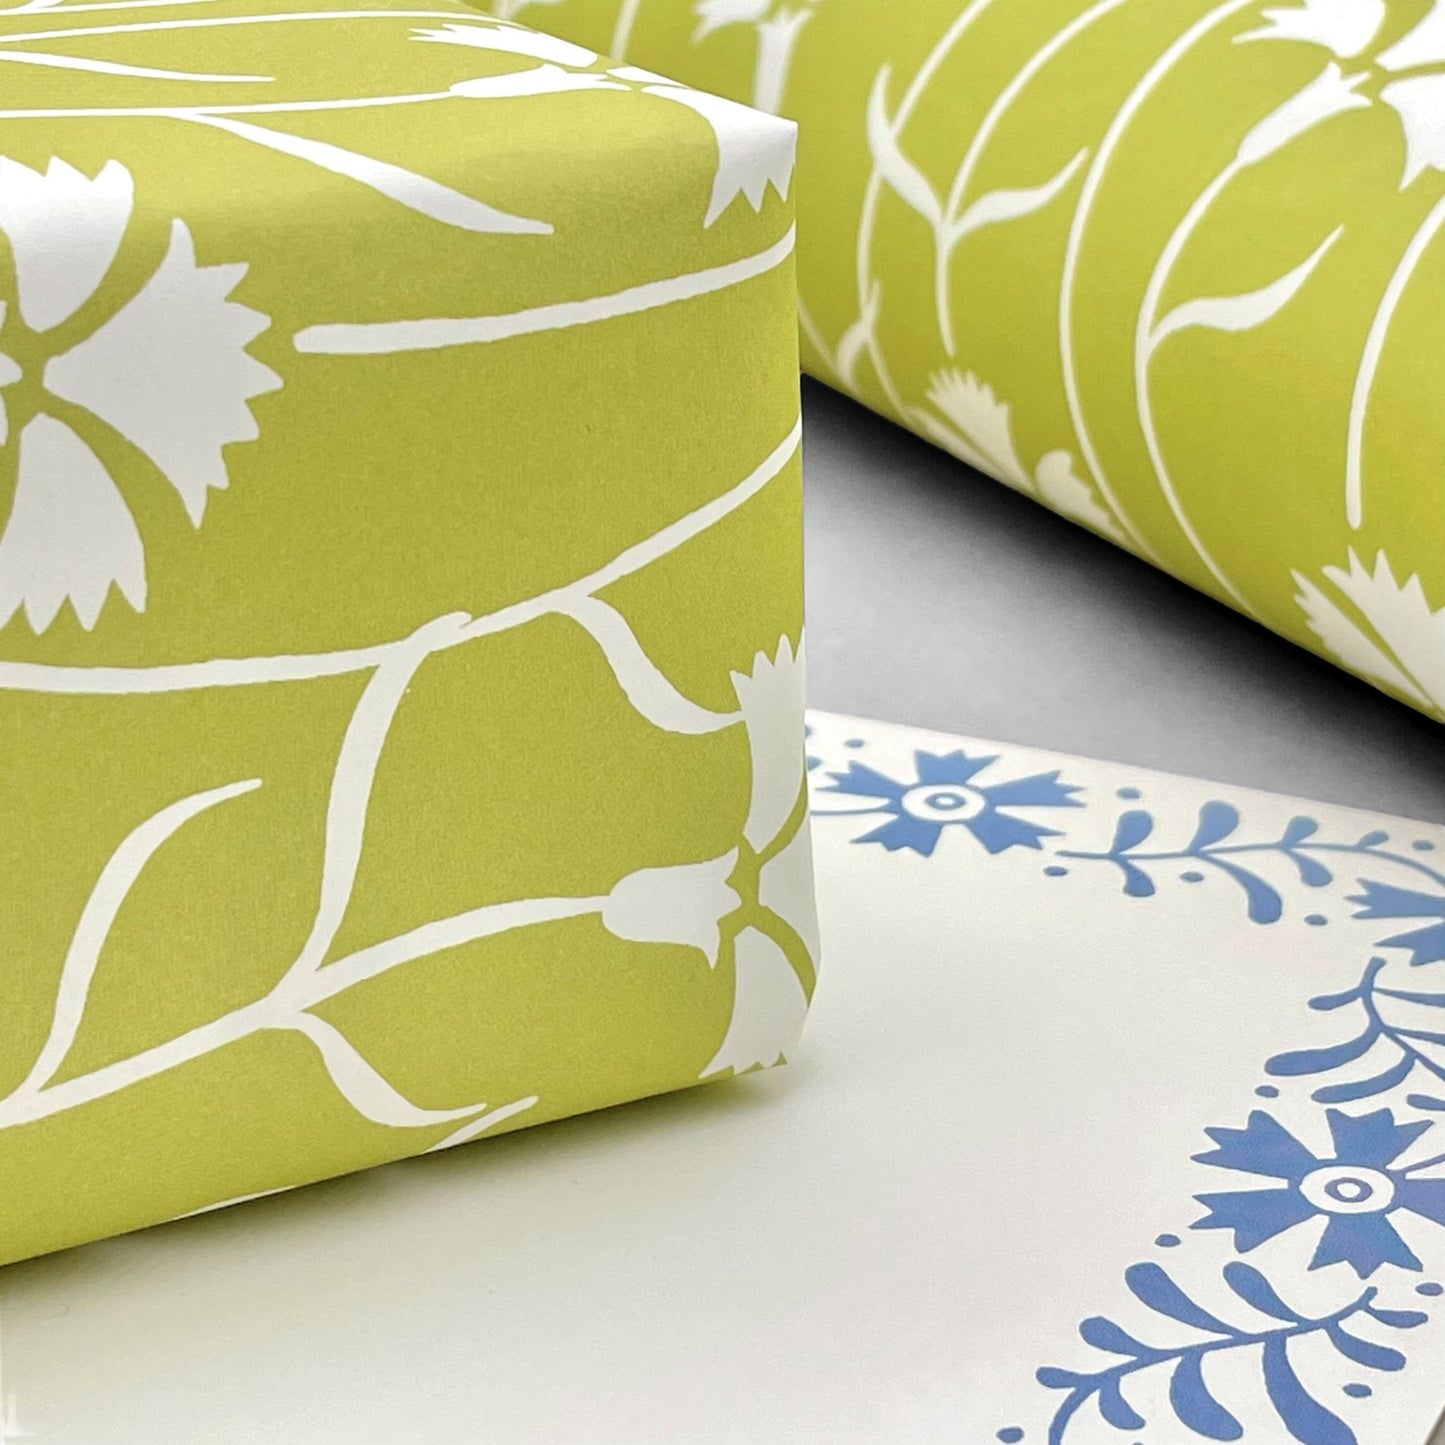 patterned paper, gift wrap with a white cornflower repeat pattern on soft lime green backdrop, by Ariana Martin